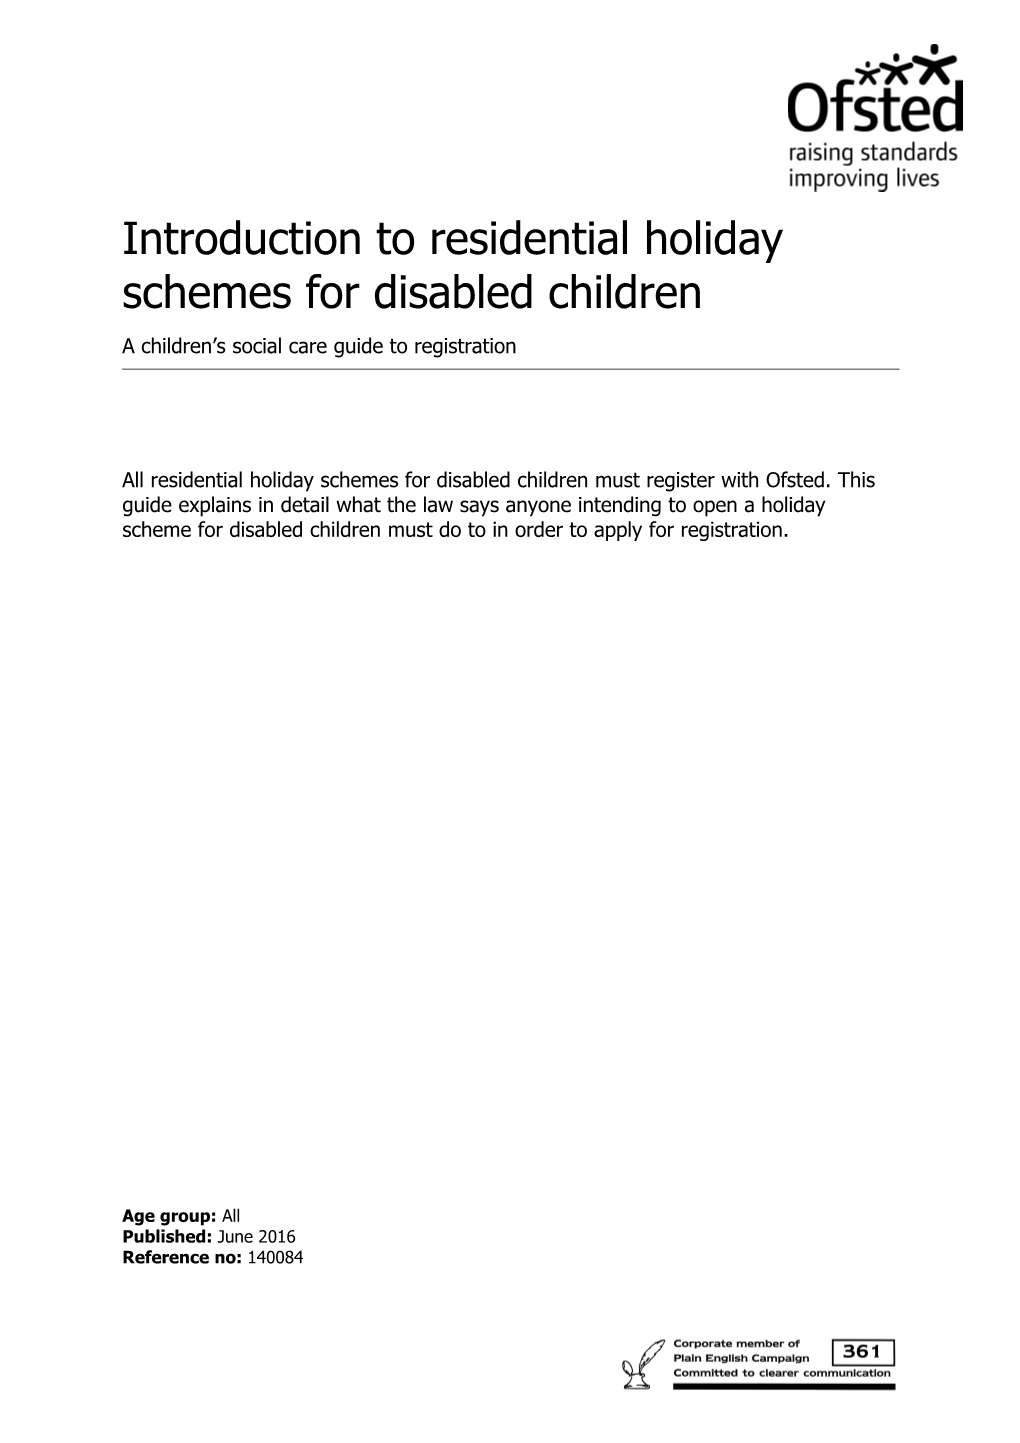 Introduction to Residential Holiday Schemes for Disabled Children